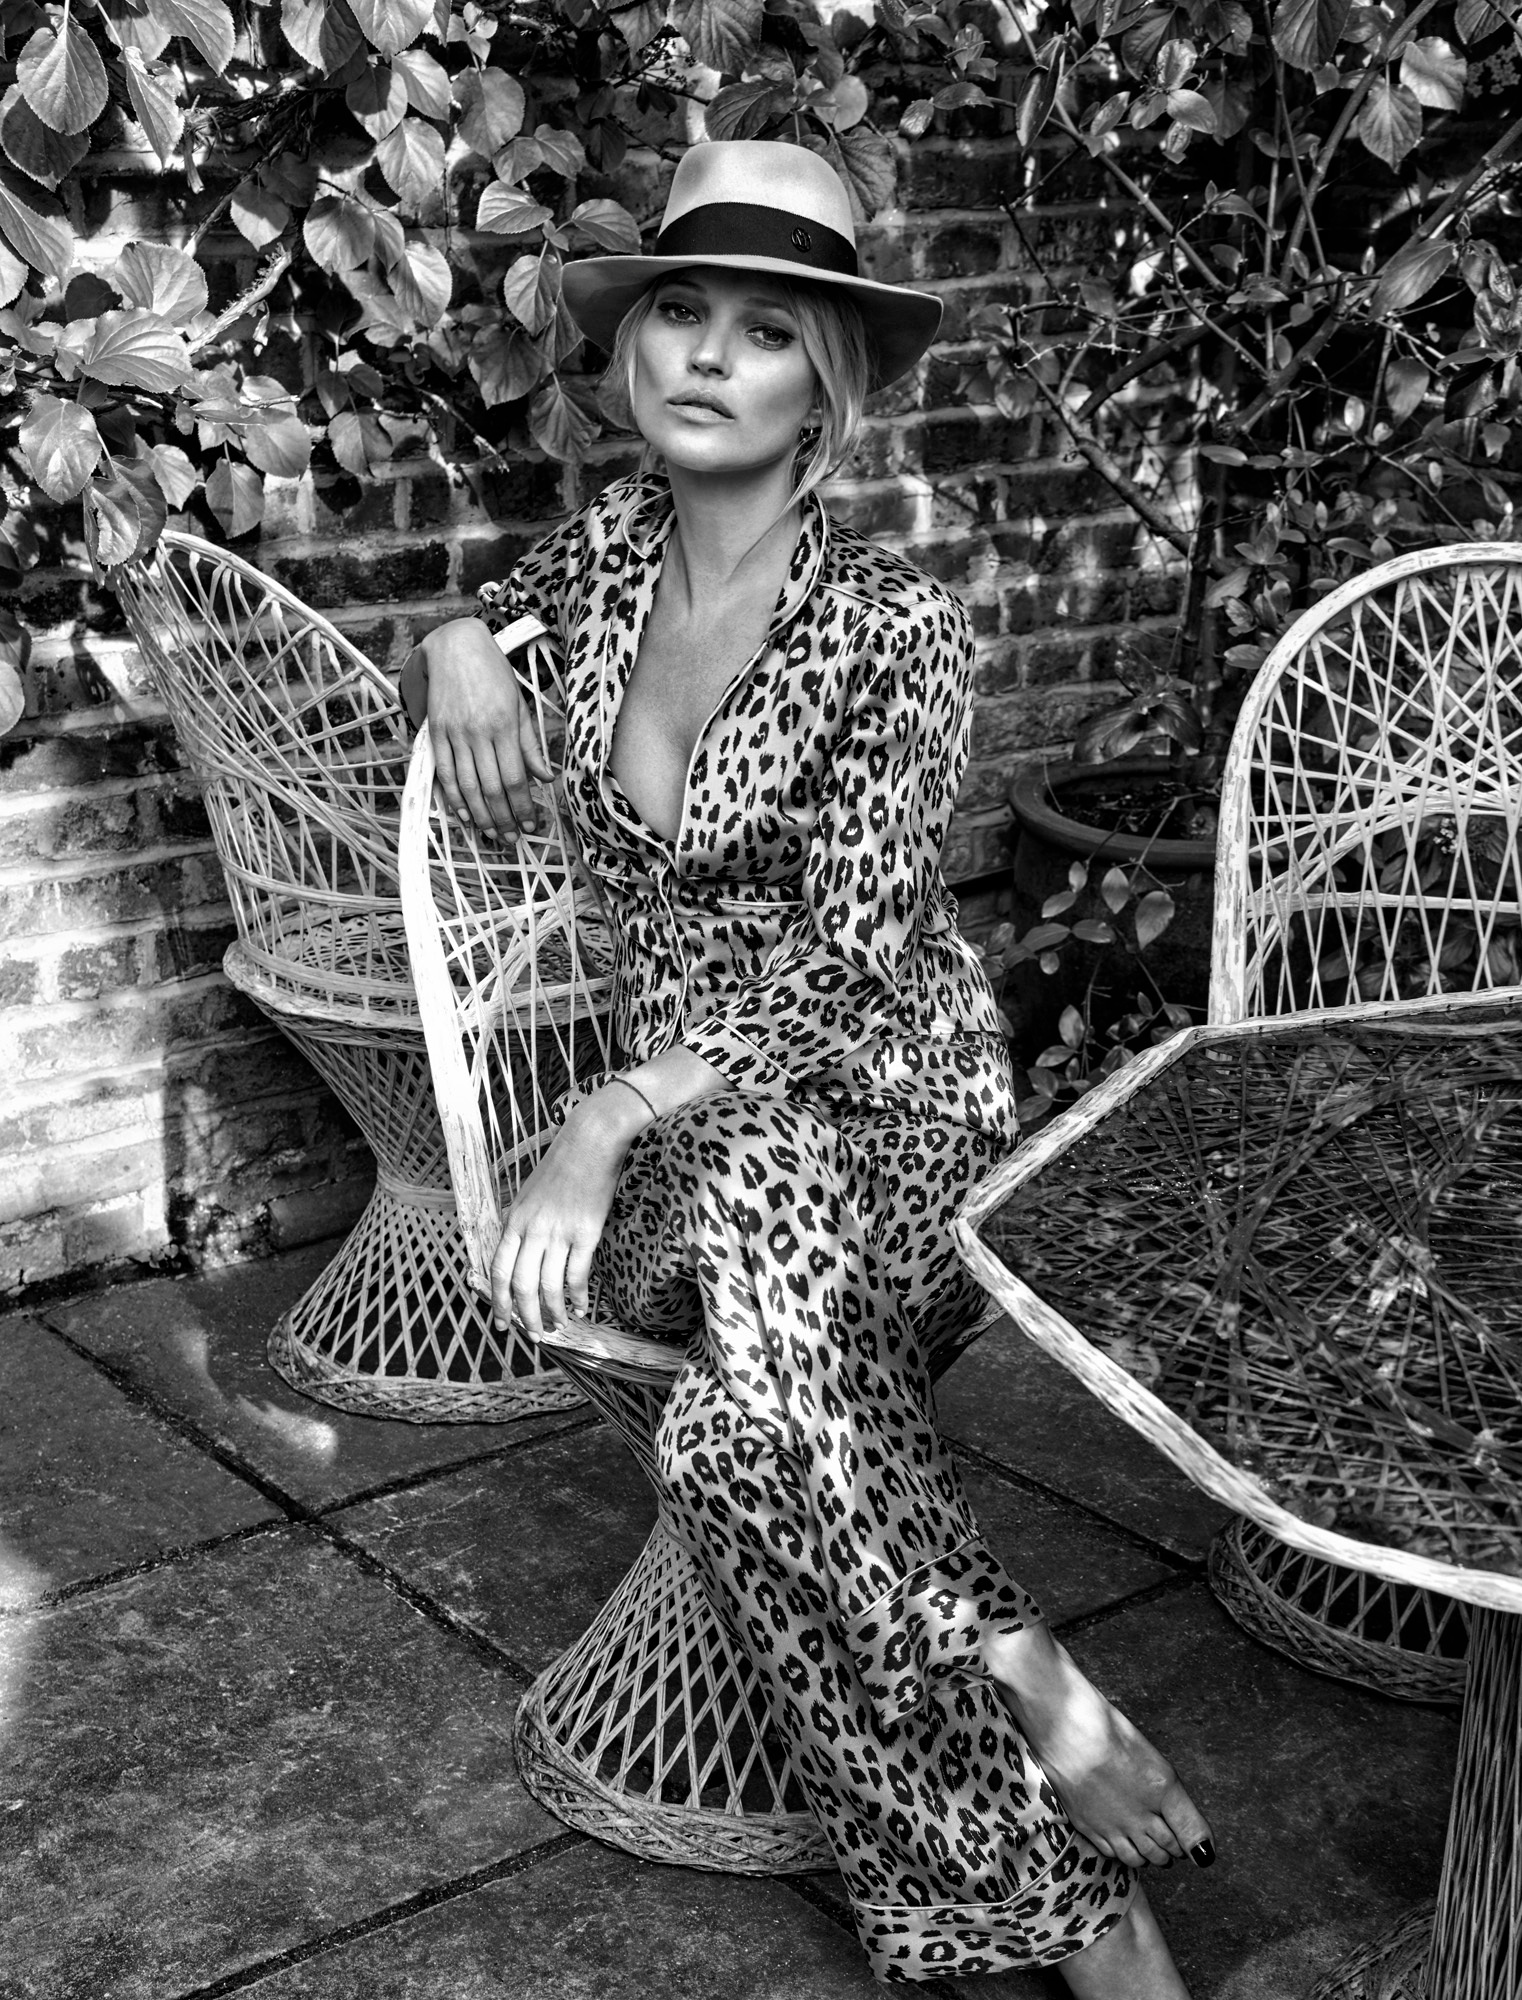 kate-moss-by-chris-colls-for-the-edit-june-2016-1.jpg